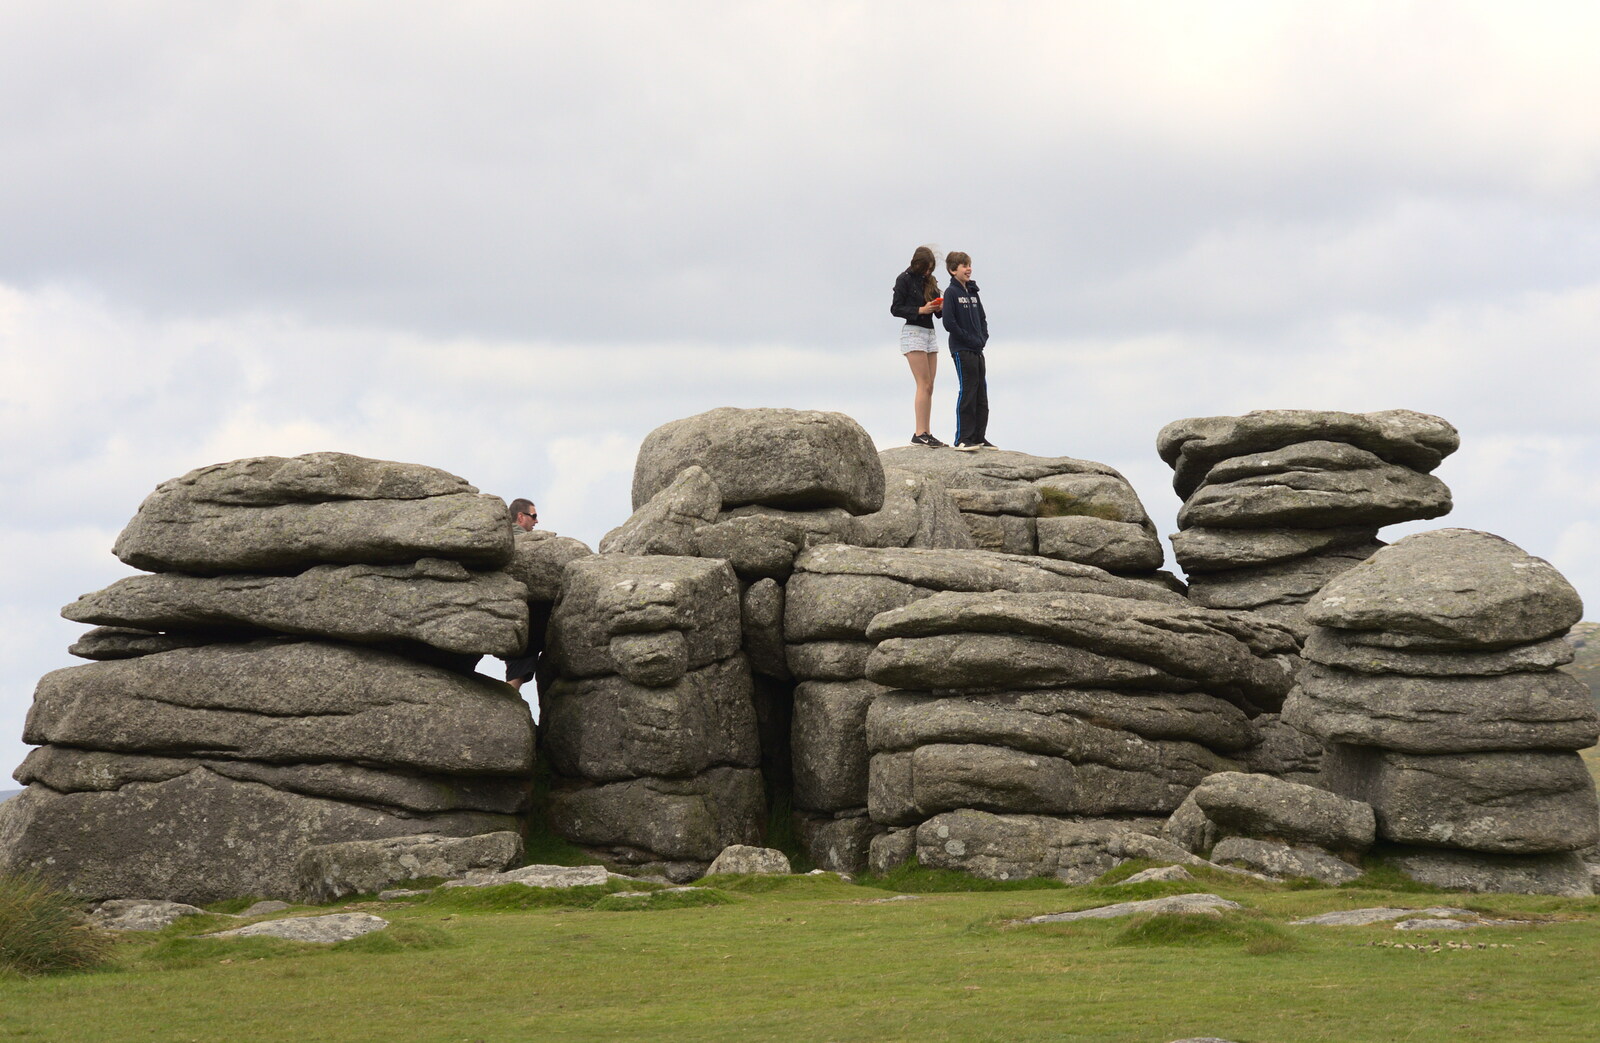 Sydney and Rowan on top of Combestone Tor from Badger's Holt and Bronze-Age Grimspound, Dartmoor, Devon - 10th August 2016